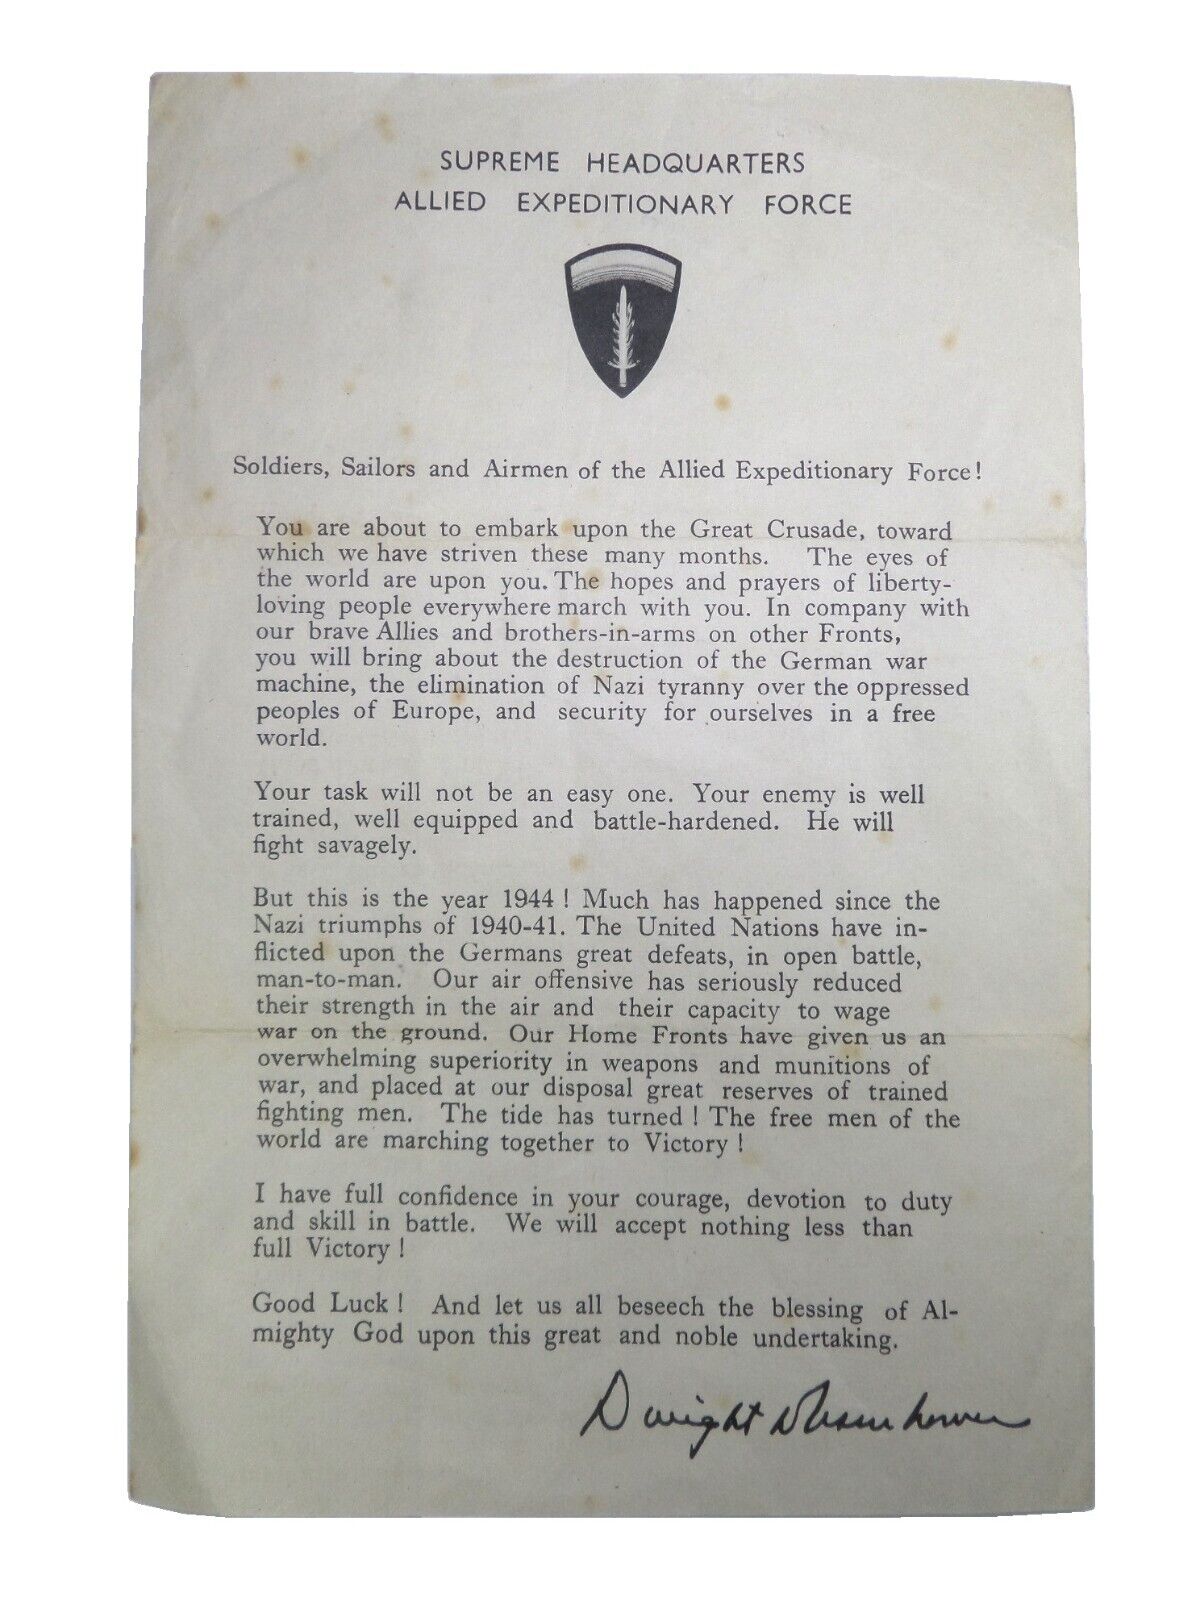 DWIGHT D. EISENHOWER\'S ORDER OF THE DAY 6TH JUNE 1944 RARE D-DAY INVASION LETTER